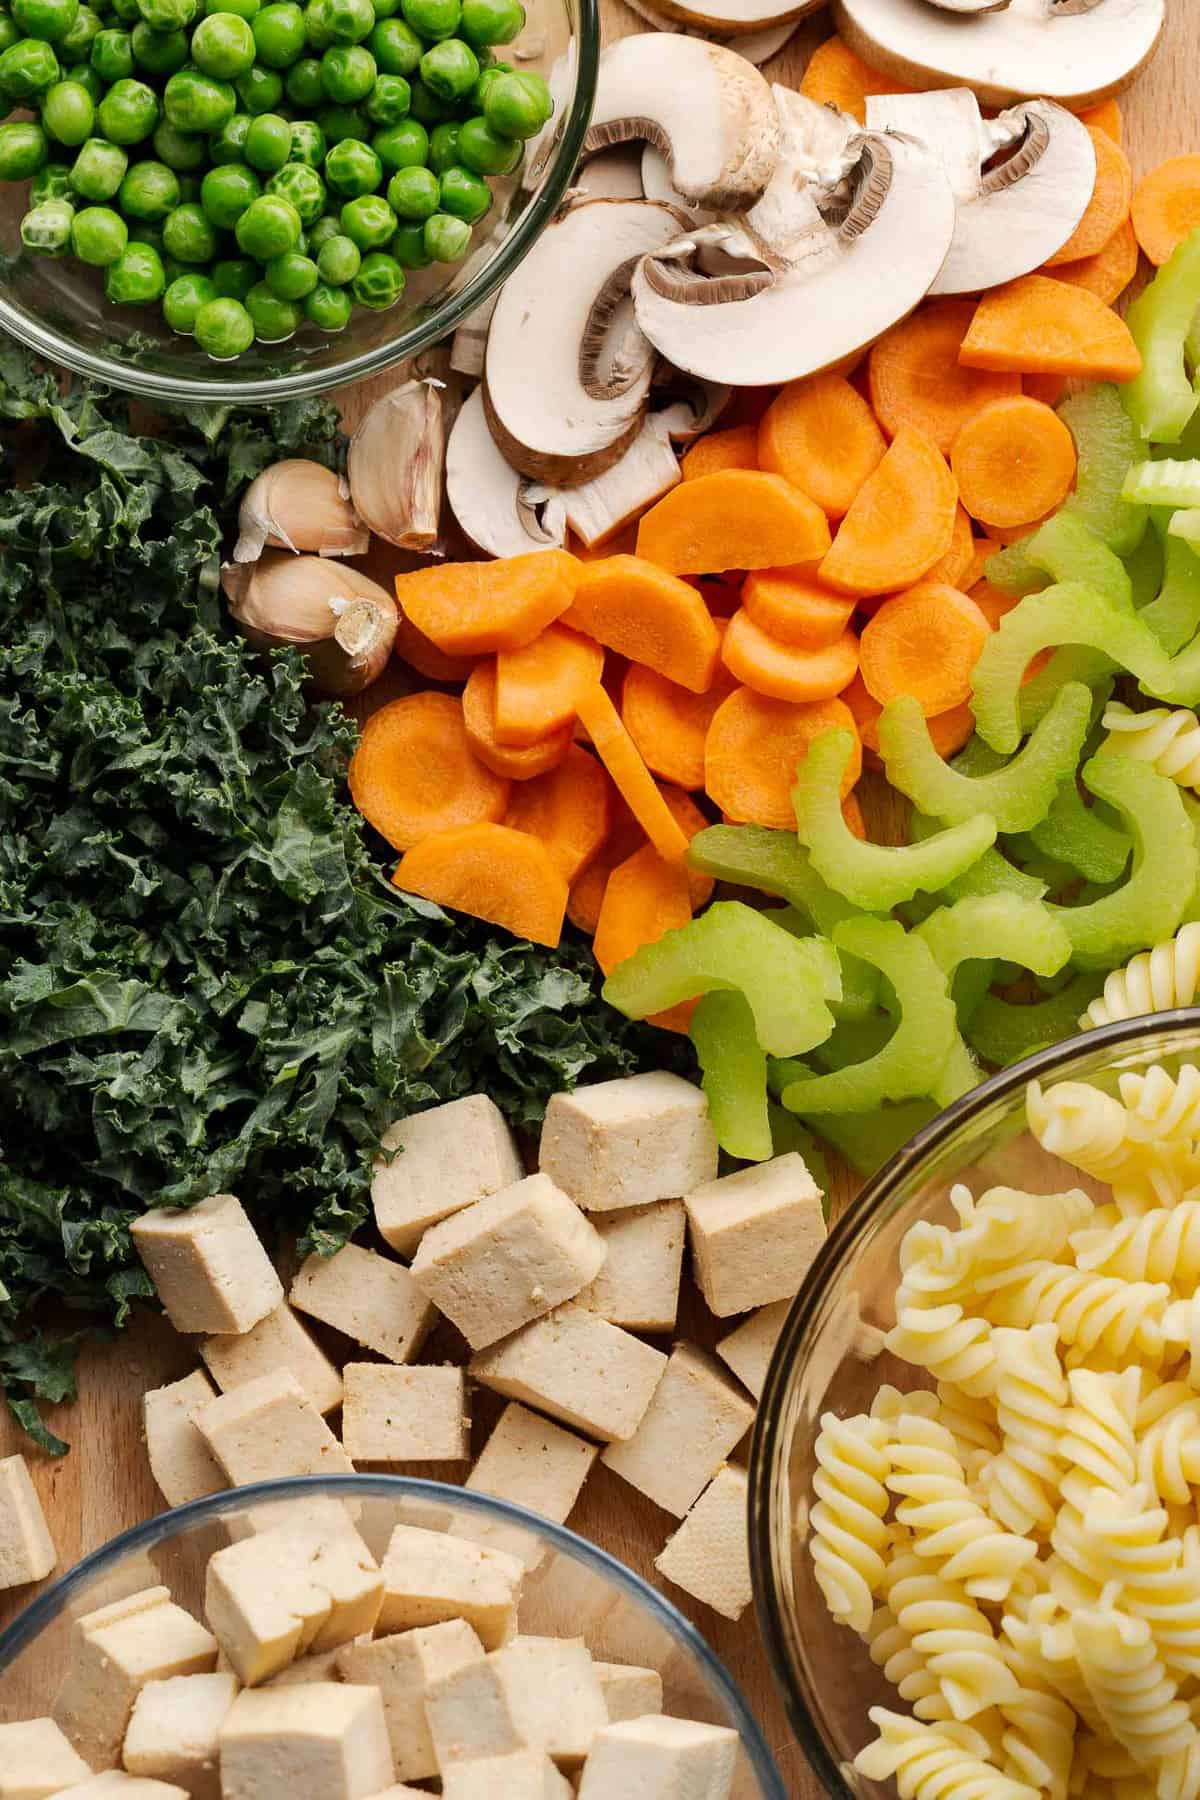 Tofu noodle soup ingredients on a cutting board: peas, mushrooms, kale, garlic, carrot, celery, tofu, and cooked fusili noodles.